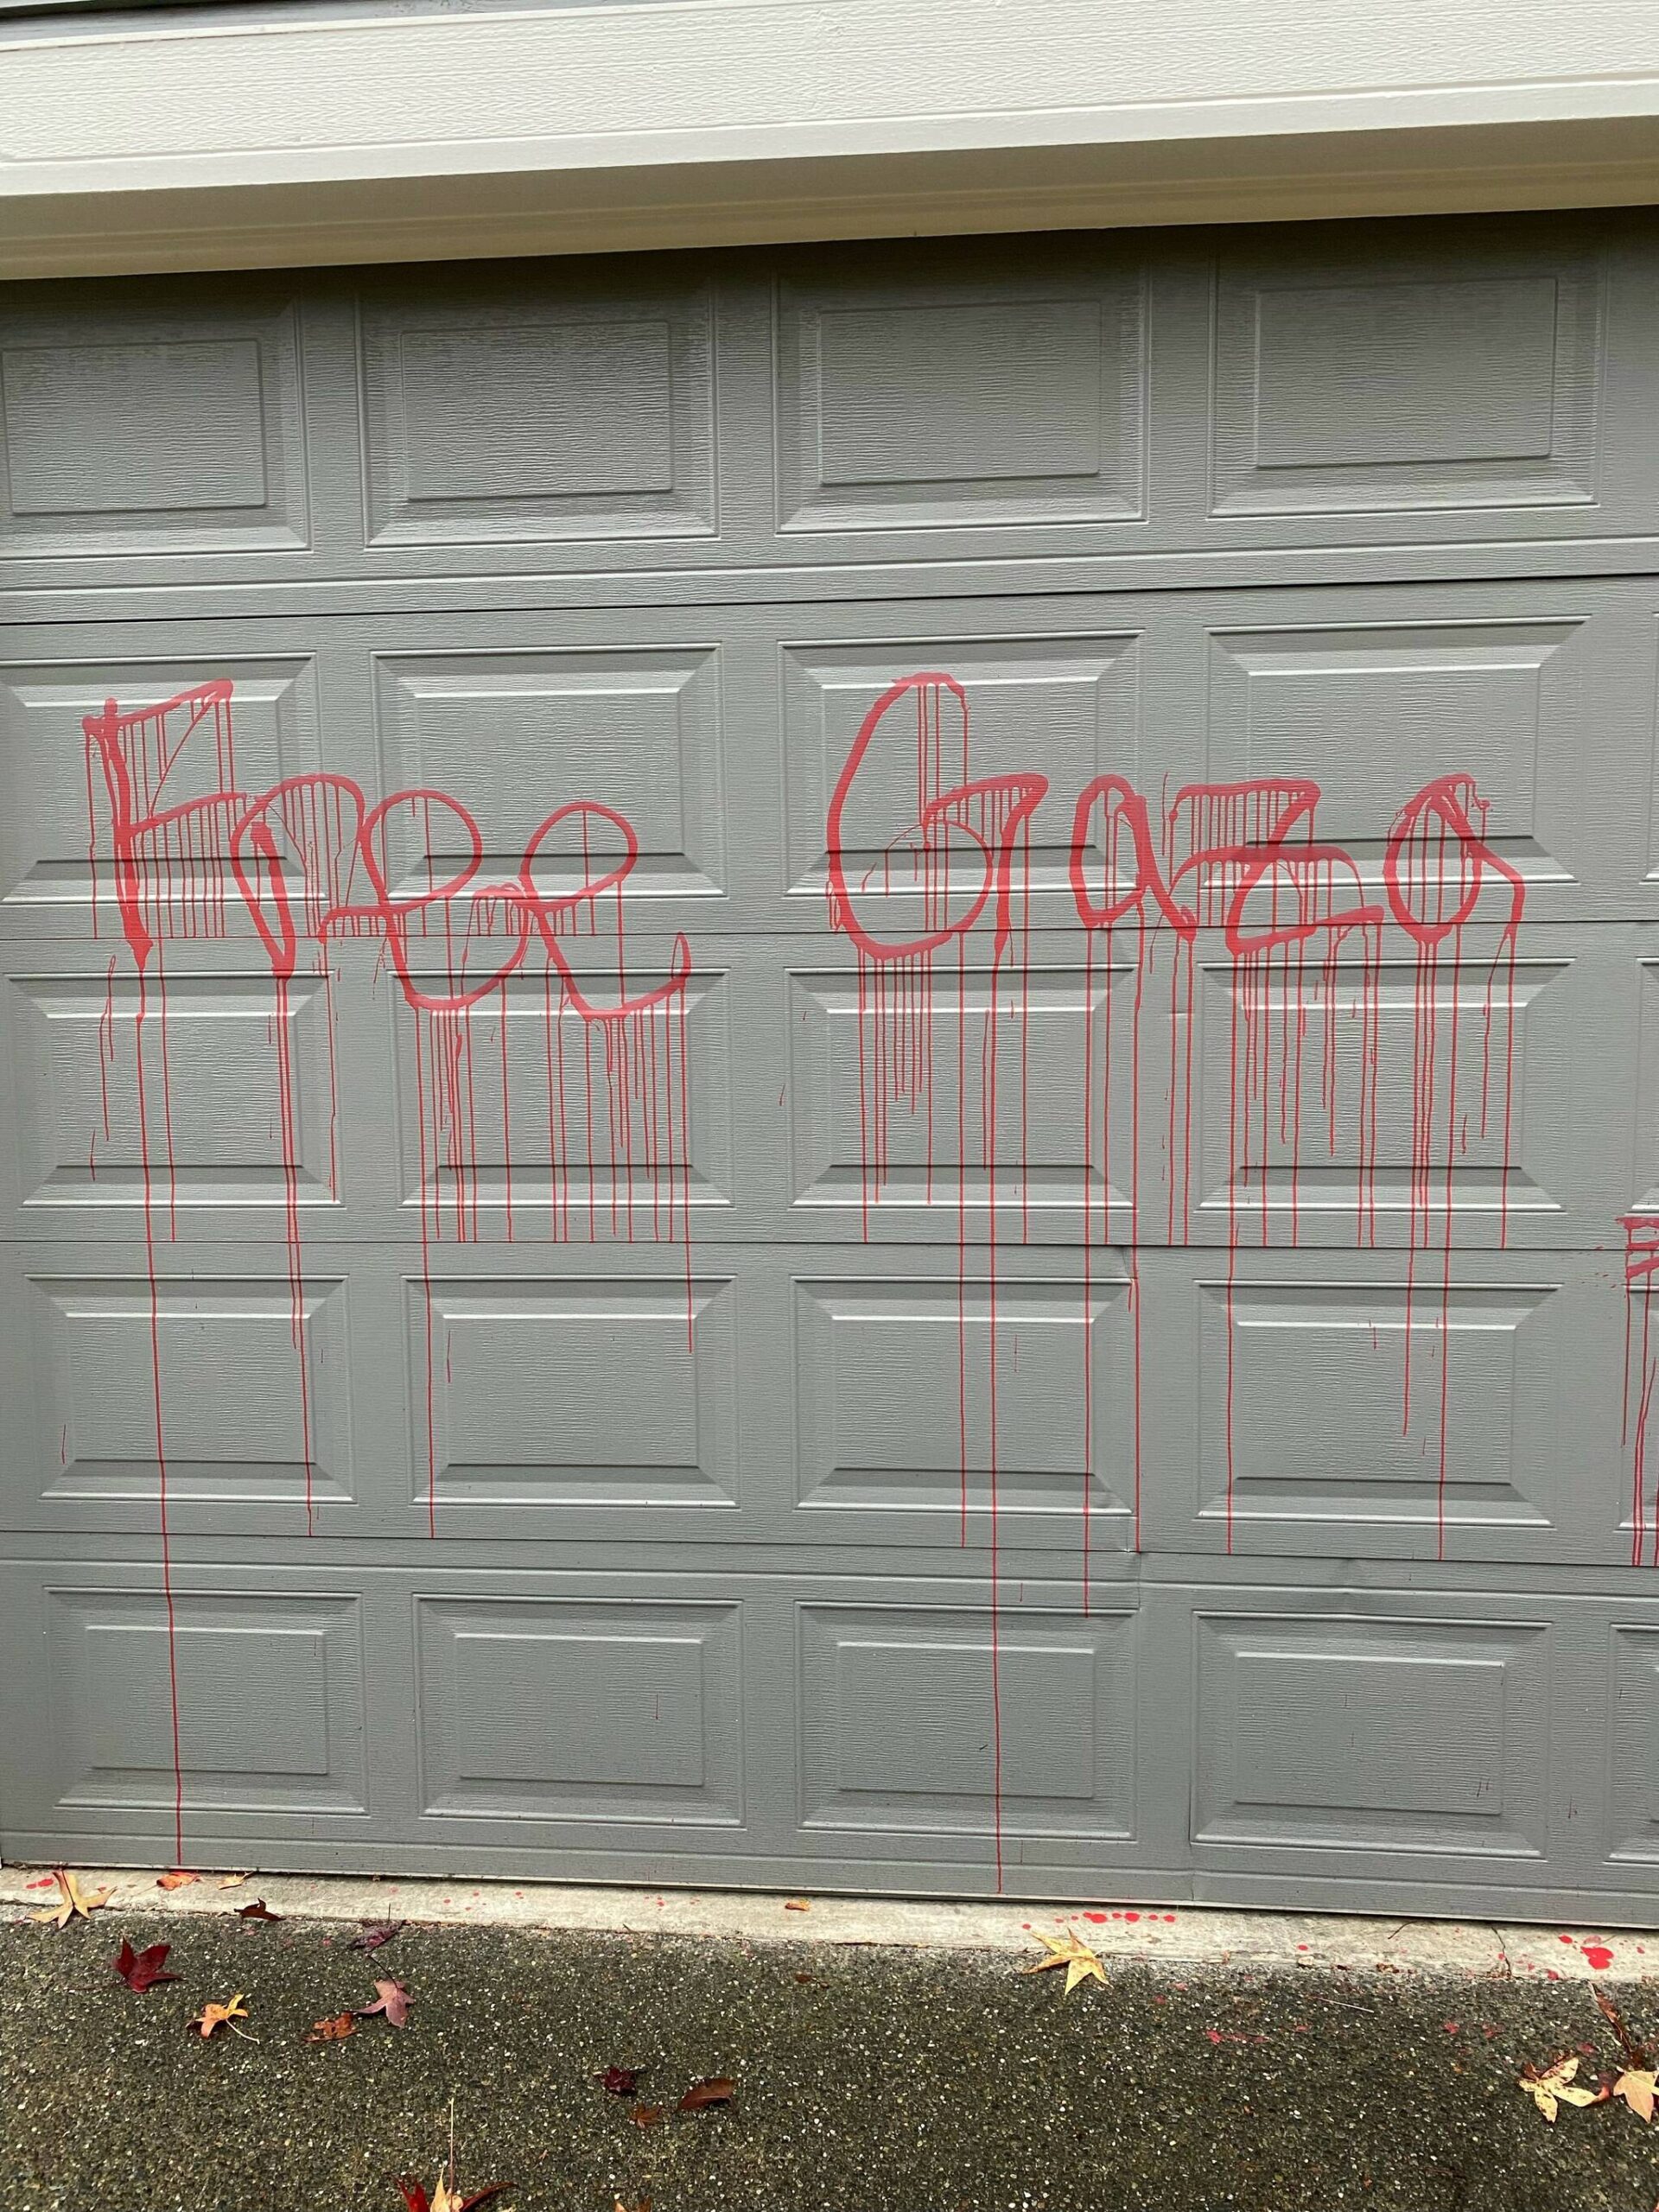 On the night of Thursday, Nov. 30 in Bellevue, people who Congressman Adam Smith said were “advocating for a cease-fire in Israel and Gaza,” vandalized his garage with spray paint. (Photo Courtesy of the Office of Congressman Adam Smith)